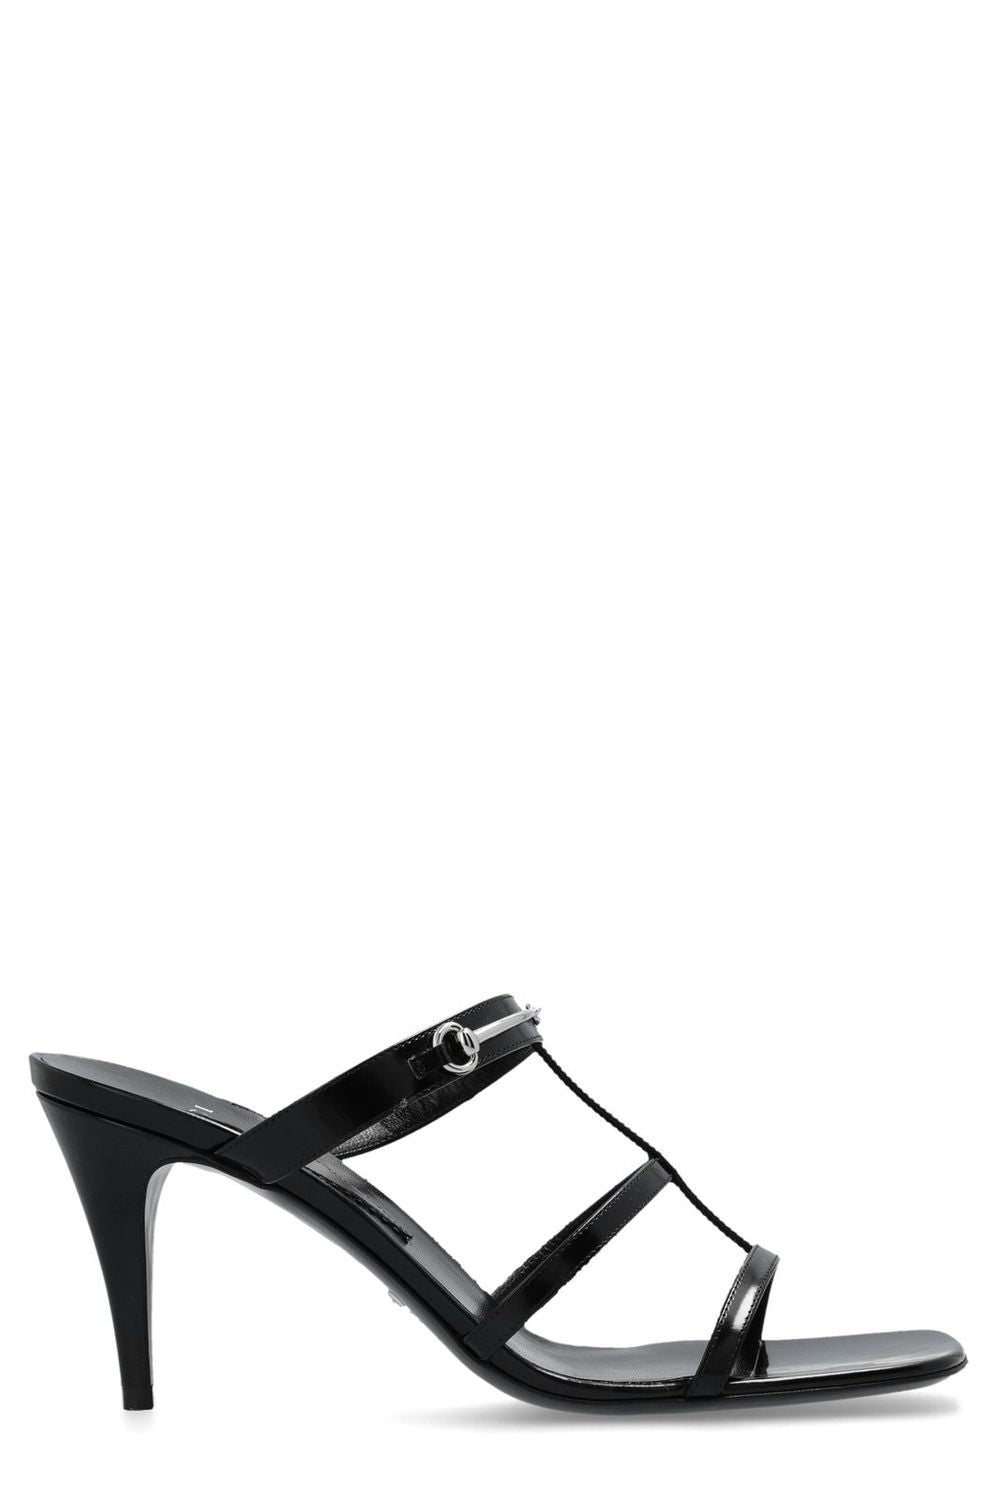 GUCCI Black Divine Leather Sandals for Women with Multi-Way Straps and Signature Horsebit Detail